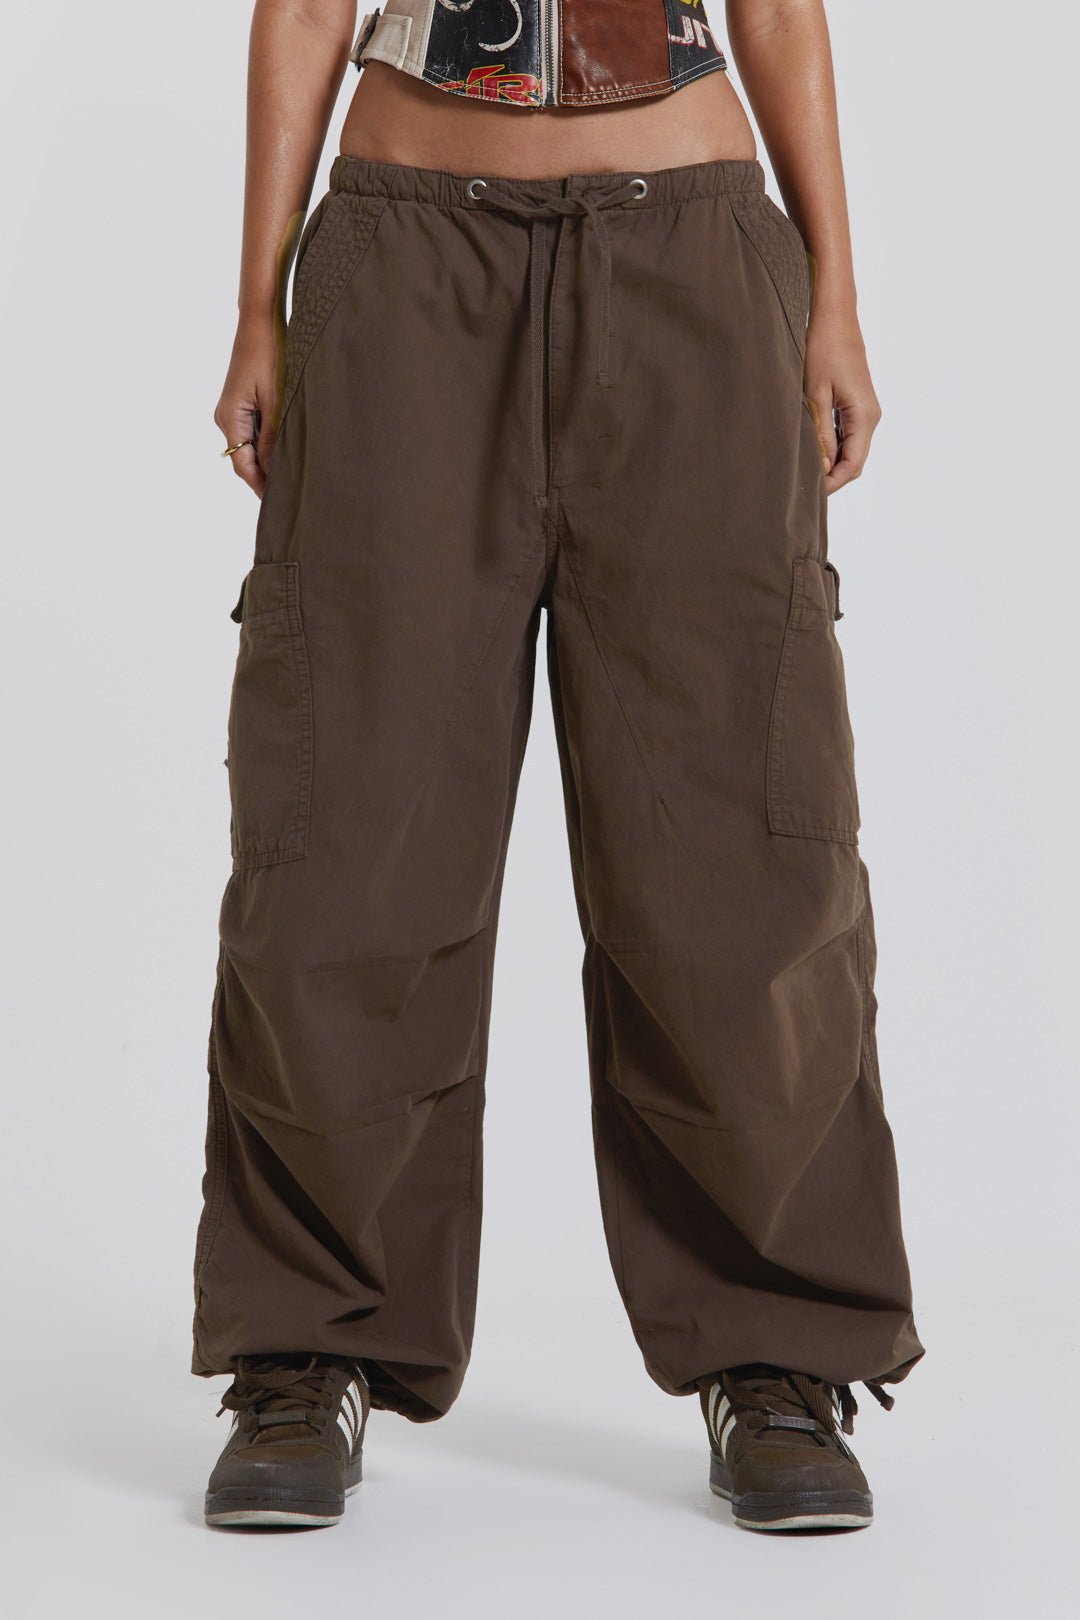 Women's Cargo Parachute Pants - All in Motion Brown XXL 1 ct